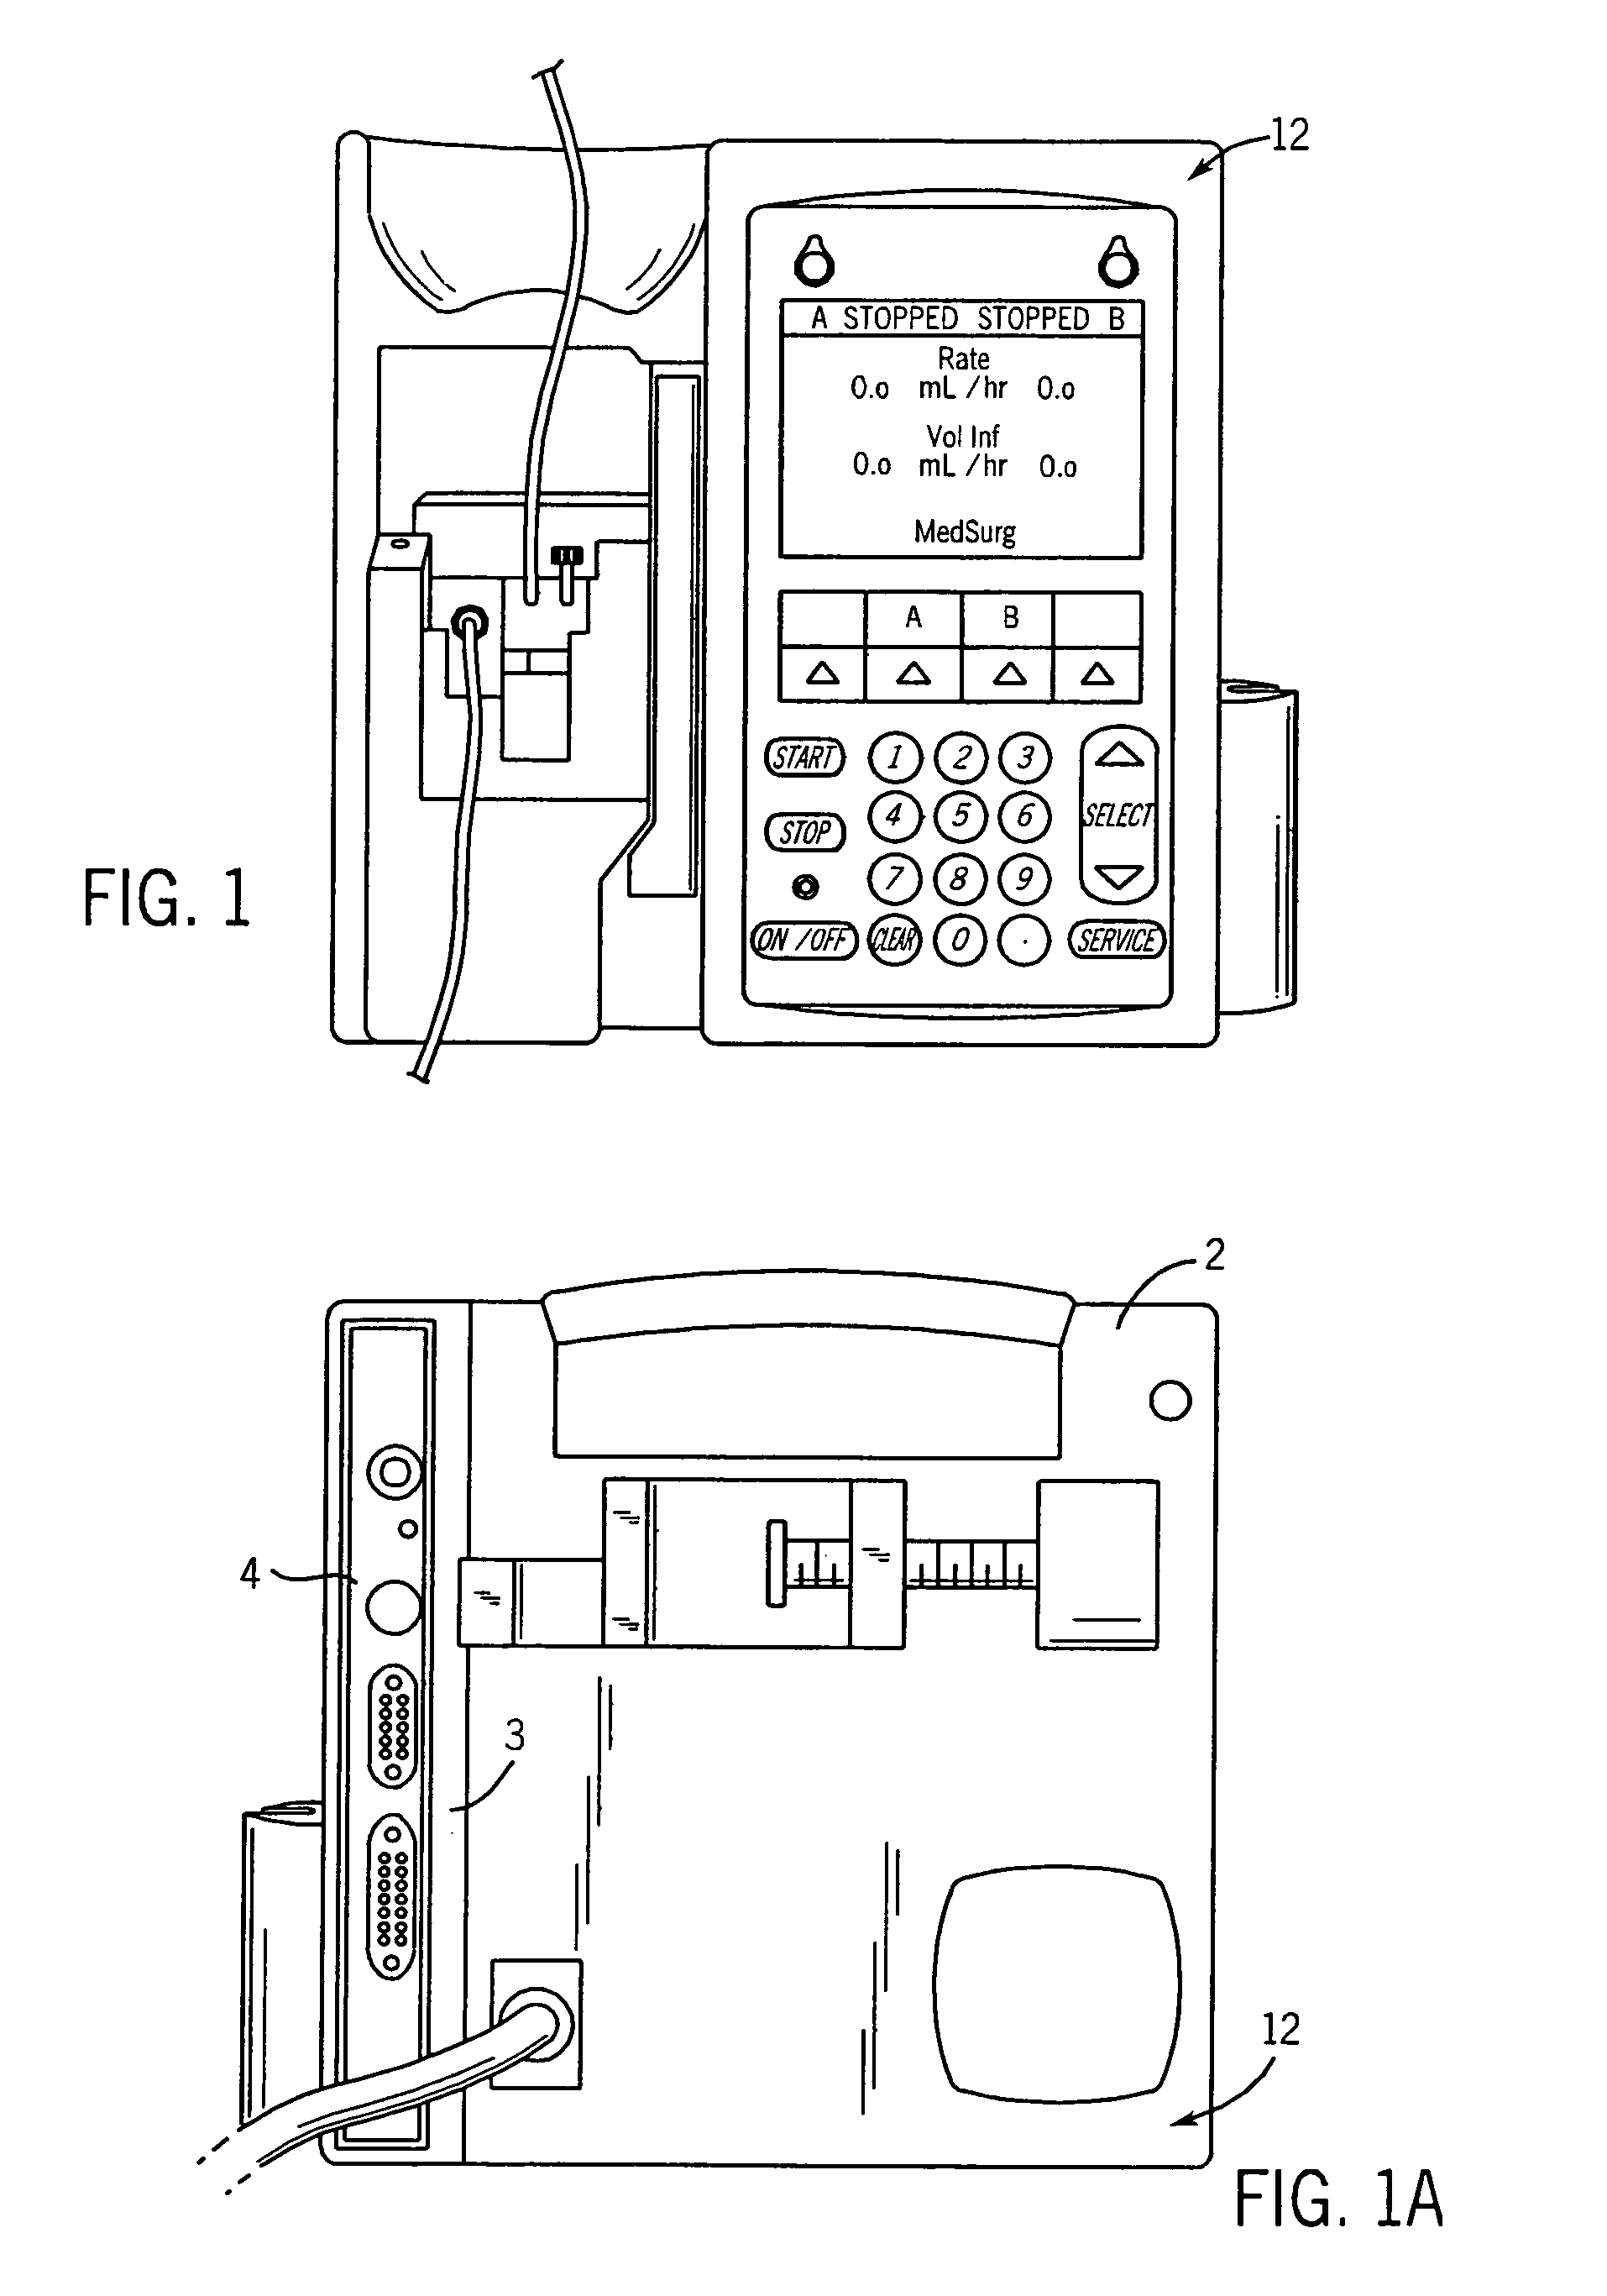 System for maintaining drug information and communicating with medication delivery devices